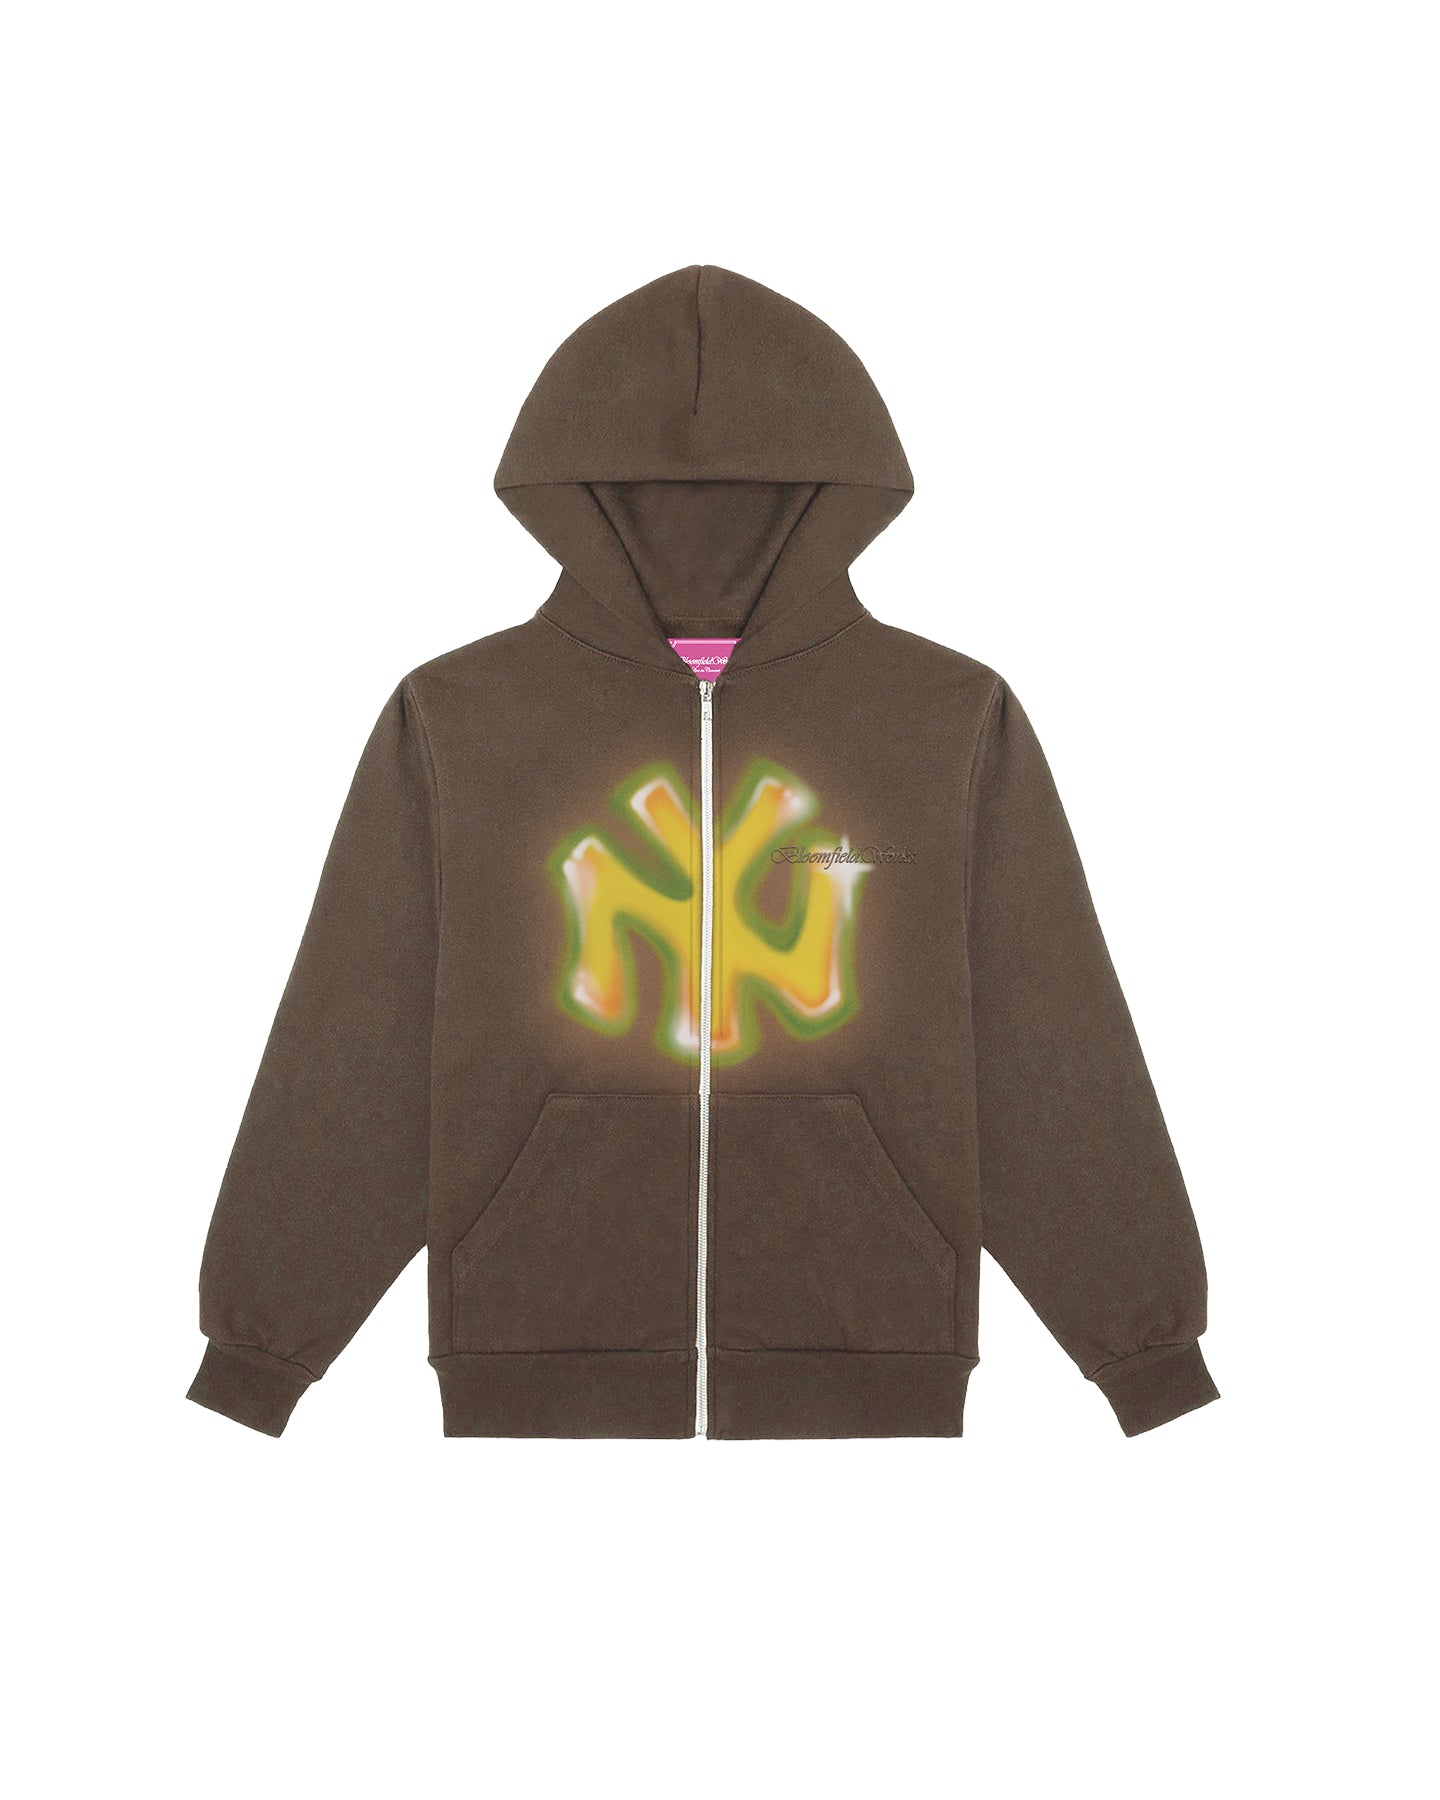 Who Jah Bless (NY Airbrush) Brown Double Zip Hoody